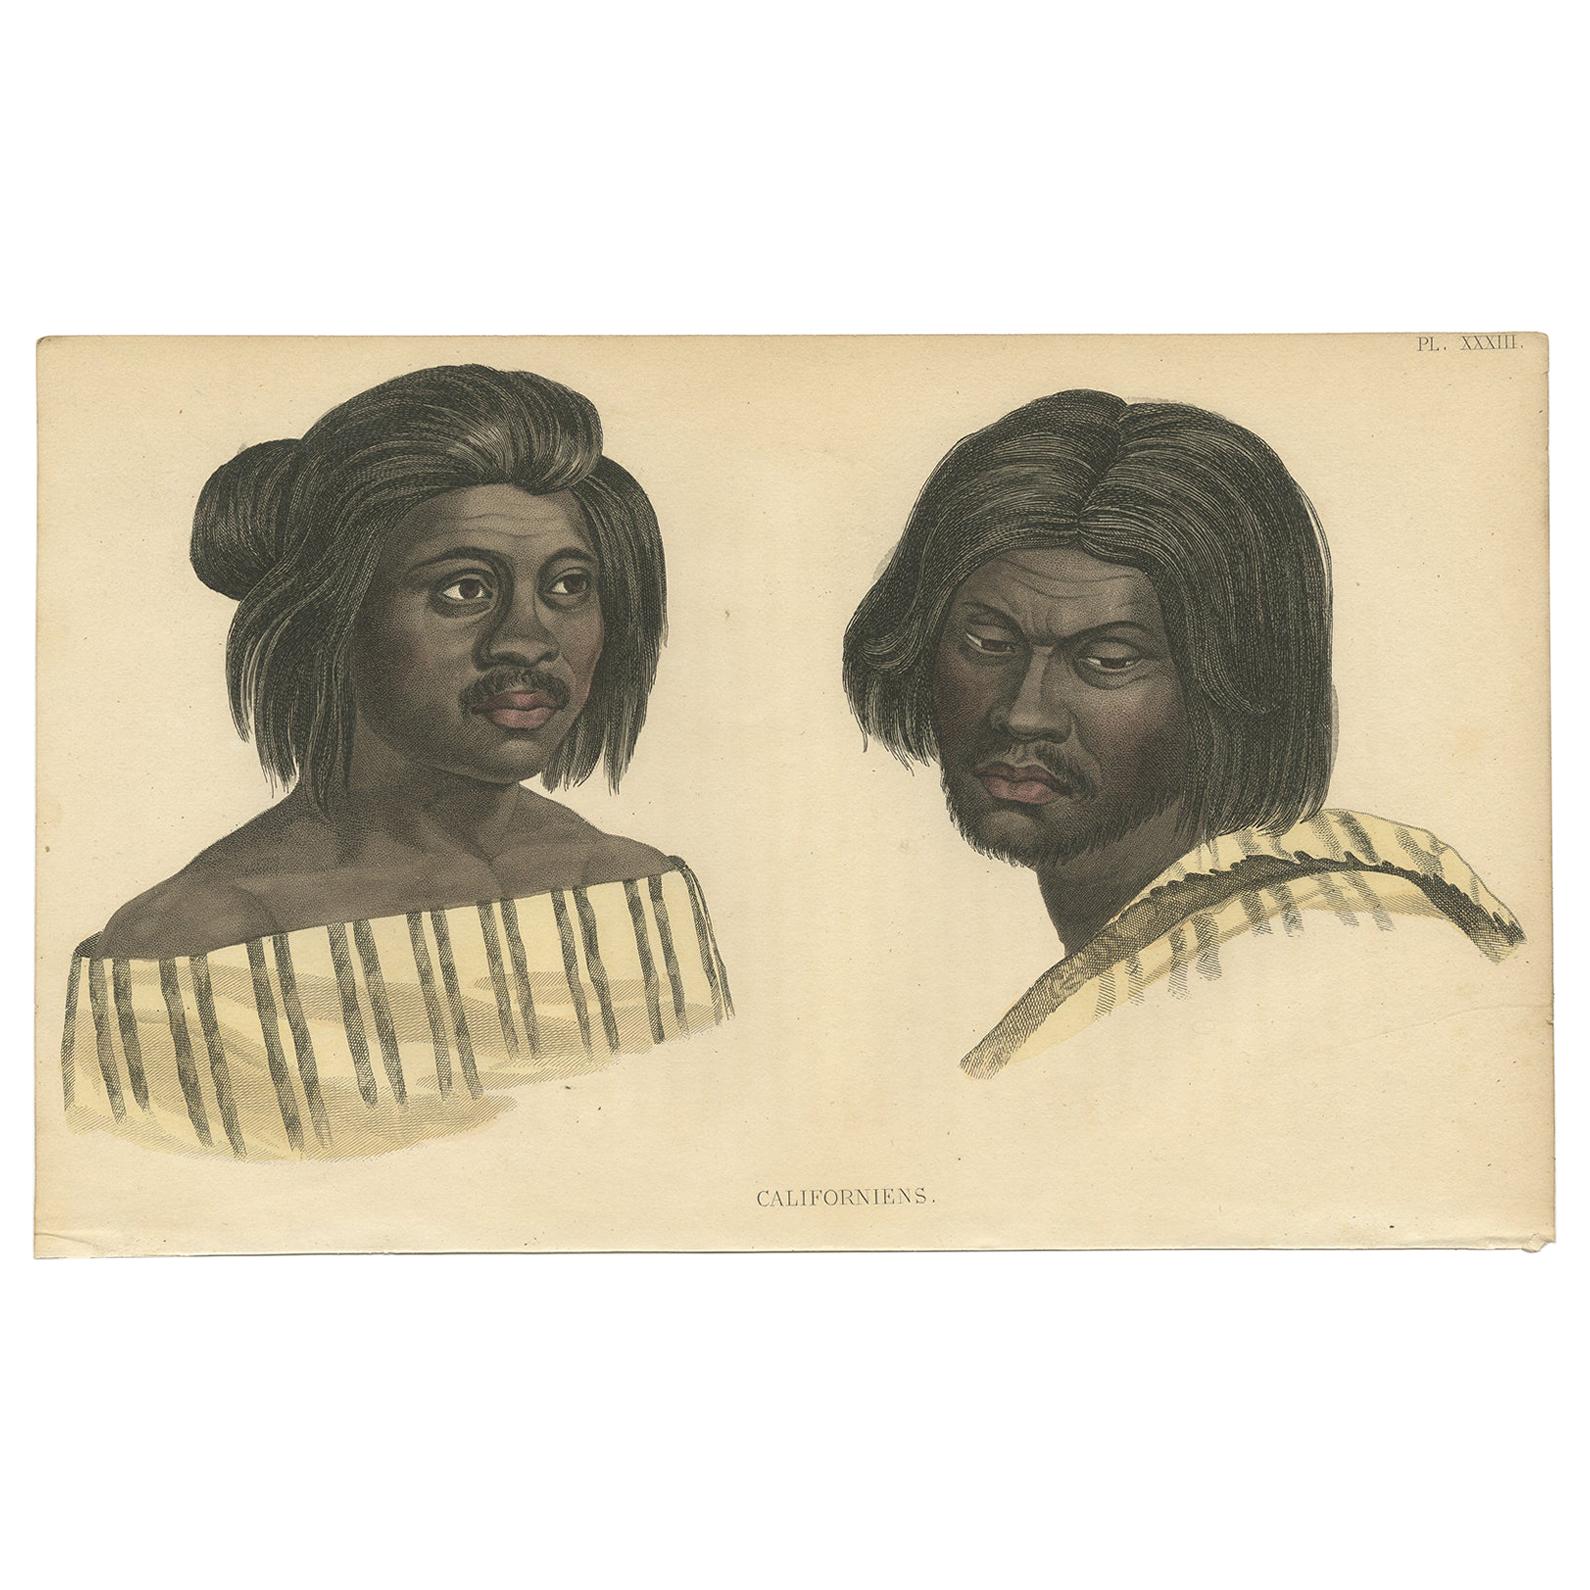 Antique Print of Native Californians by Prichard '1843'